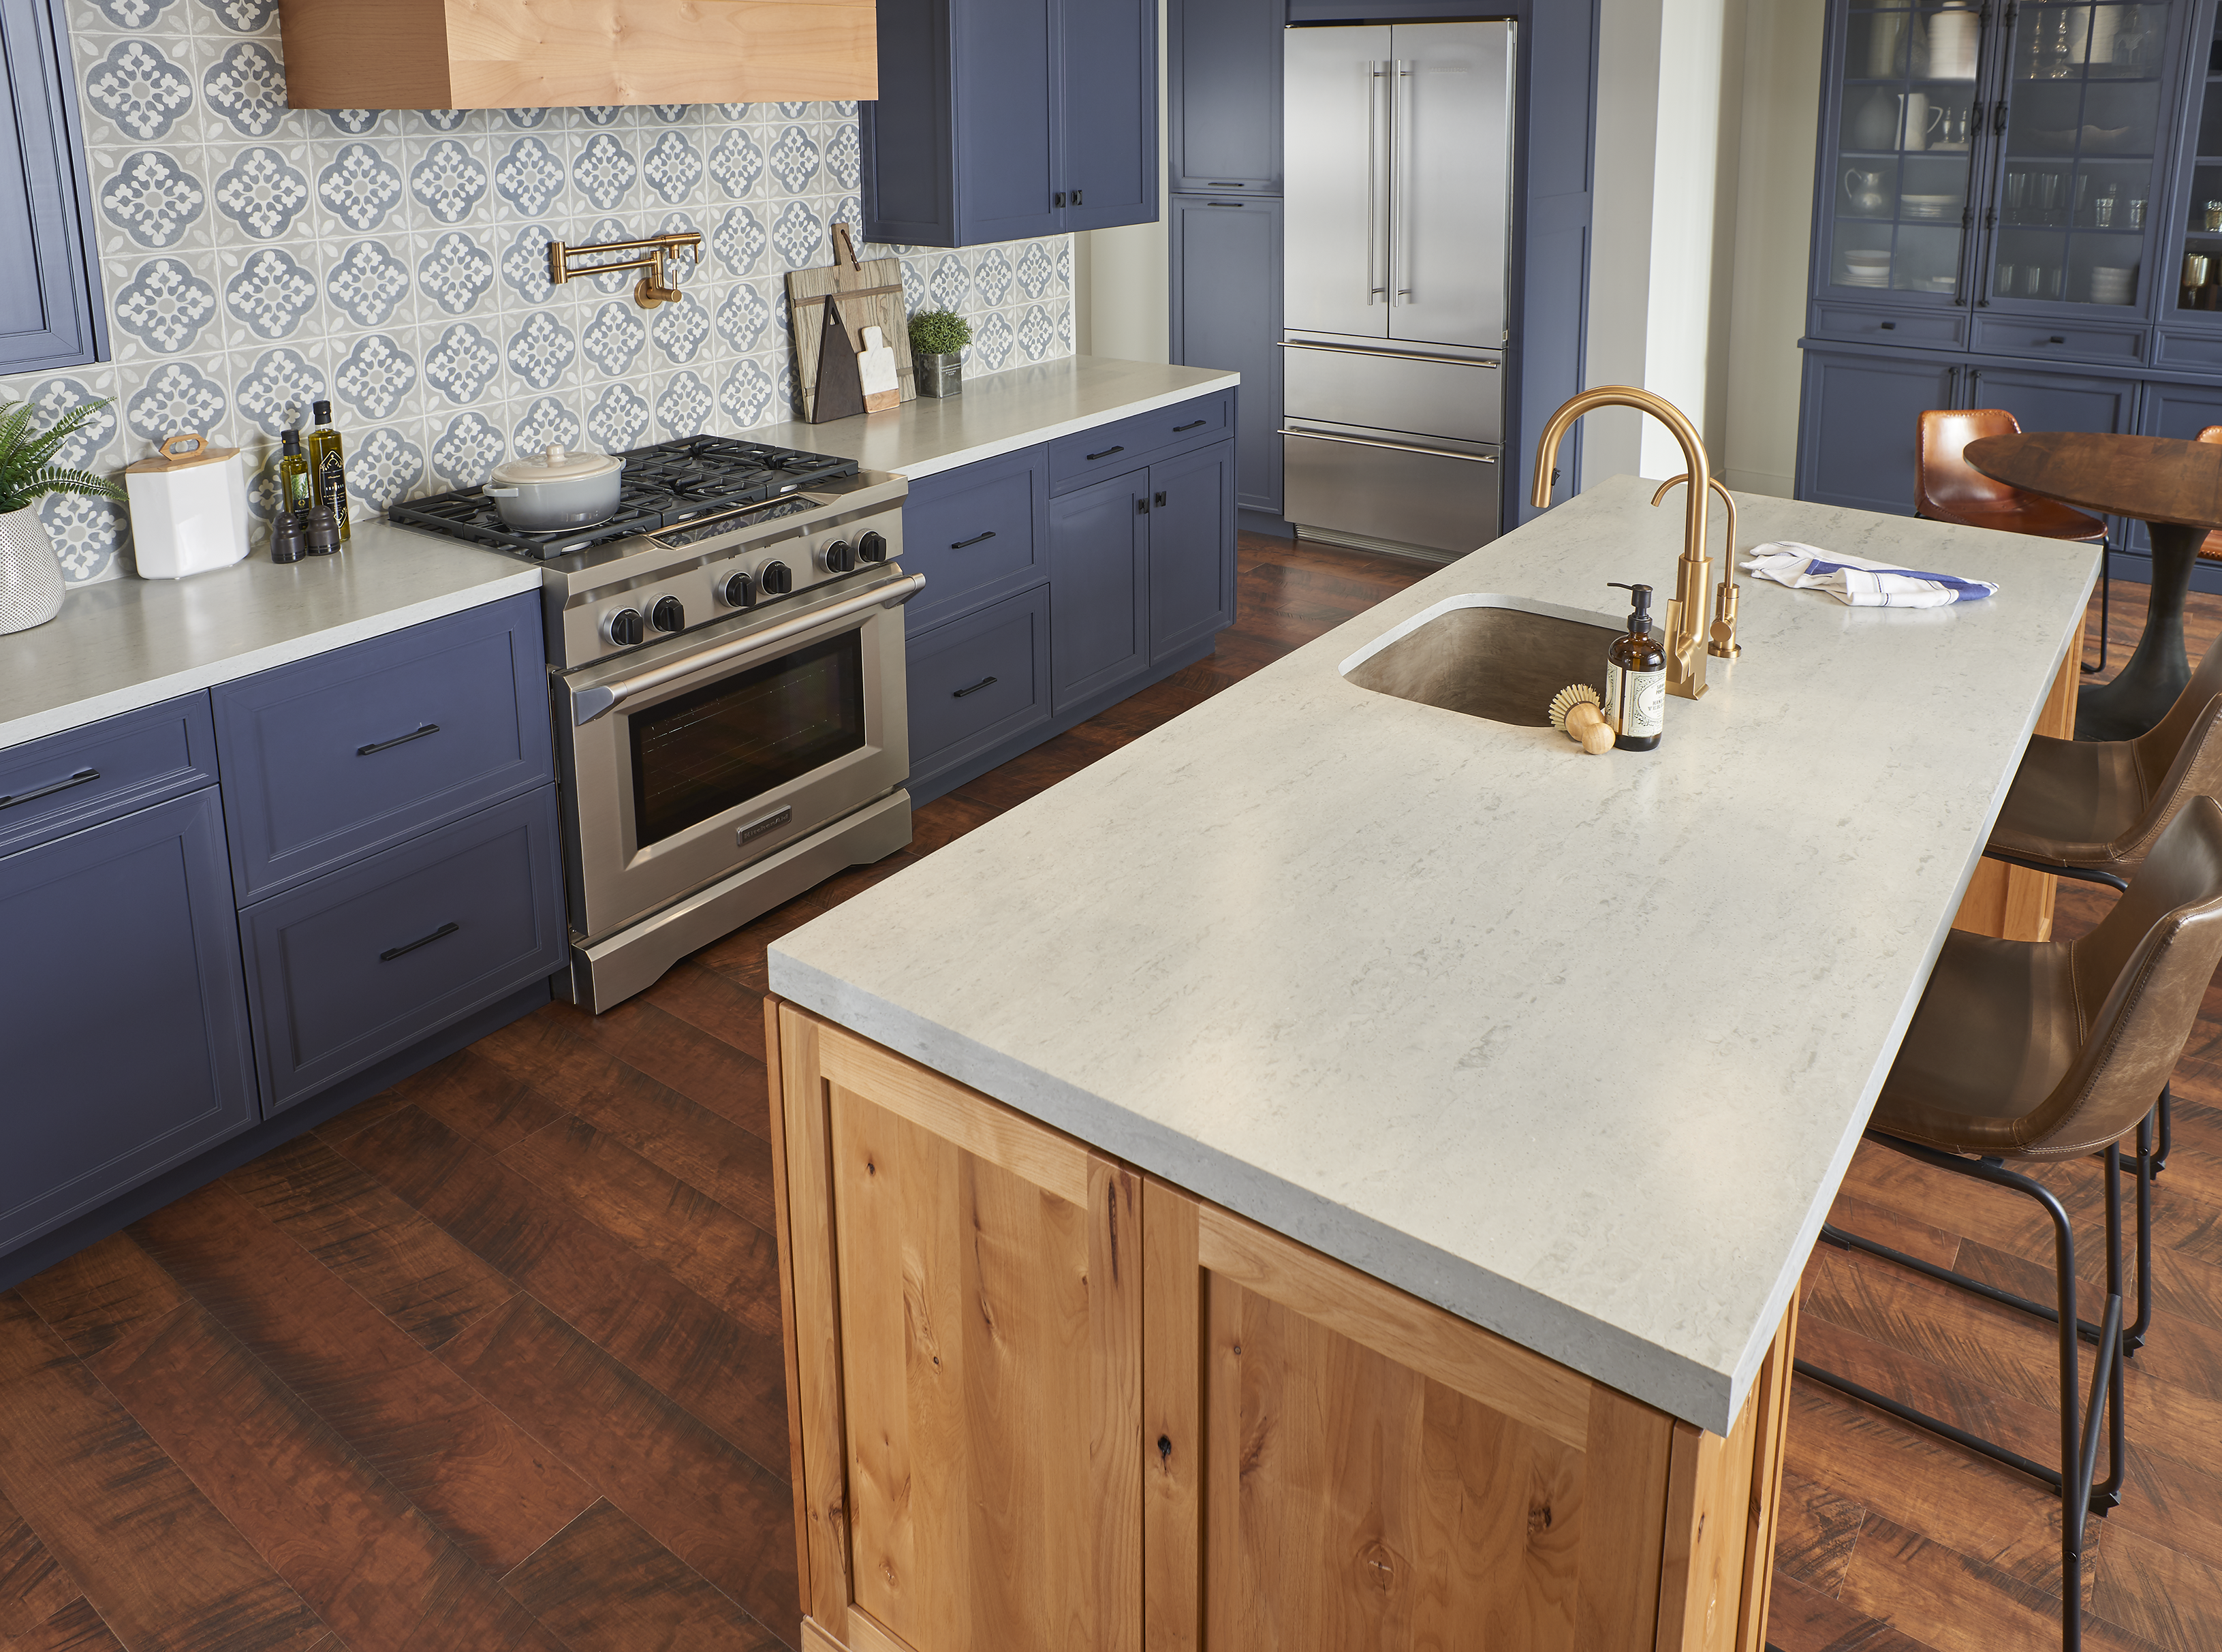 blue kitchen cabinets with solid surface countertops and full height tile backsplash